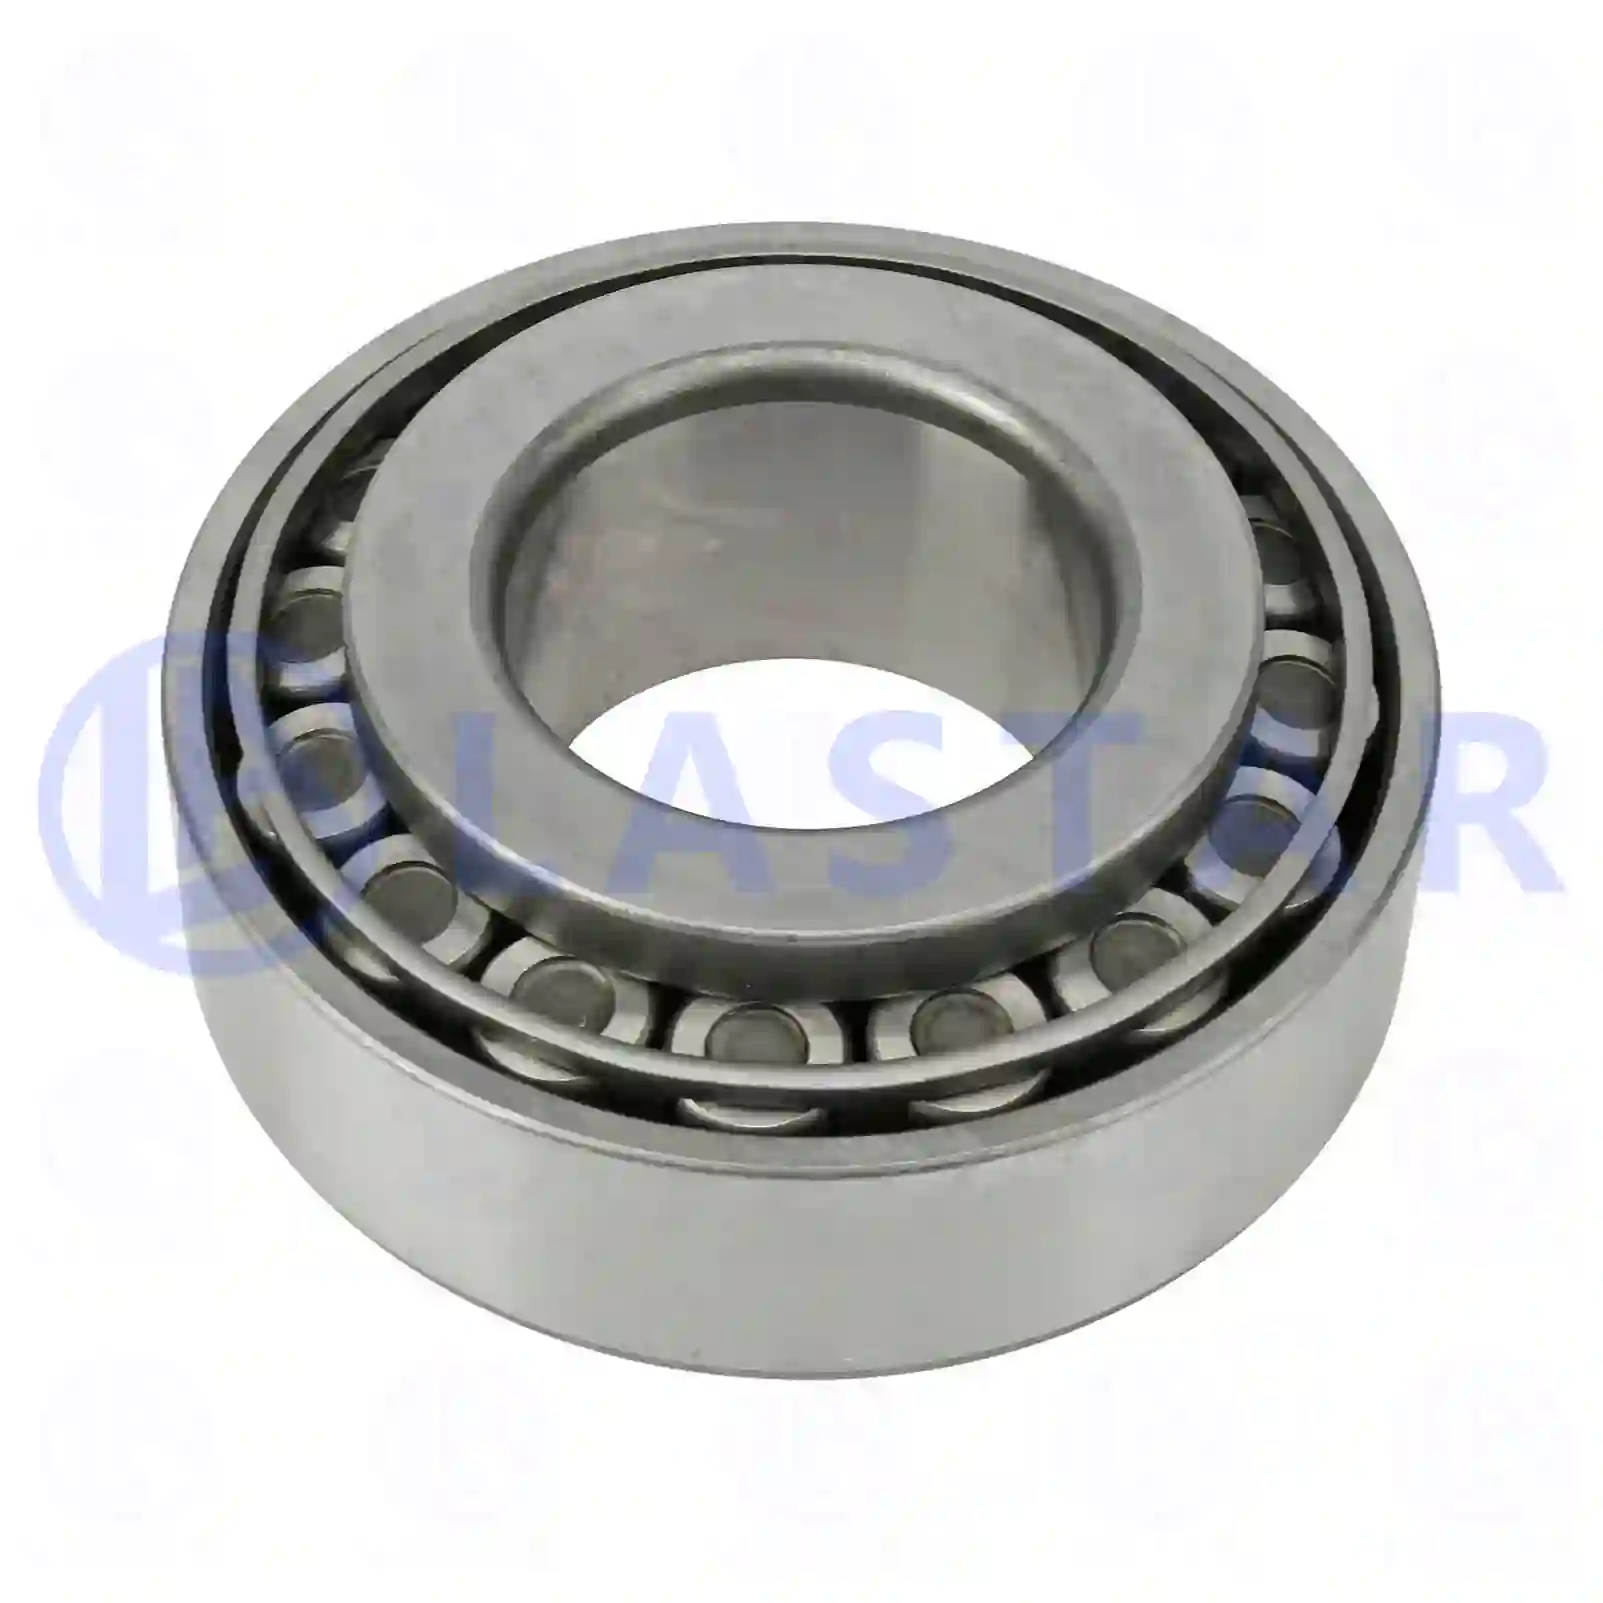 Tapered roller bearing, 77726314, 0264066000, 26800390, 01110022, 3612966000, 0119816805, 0119816905, 0159817505, 5000682795, 4200003300, 1301675, 14836, 1911817, EN361966000, 66911710000, 1699340, ZG02974-0008 ||  77726314 Lastar Spare Part | Truck Spare Parts, Auotomotive Spare Parts Tapered roller bearing, 77726314, 0264066000, 26800390, 01110022, 3612966000, 0119816805, 0119816905, 0159817505, 5000682795, 4200003300, 1301675, 14836, 1911817, EN361966000, 66911710000, 1699340, ZG02974-0008 ||  77726314 Lastar Spare Part | Truck Spare Parts, Auotomotive Spare Parts